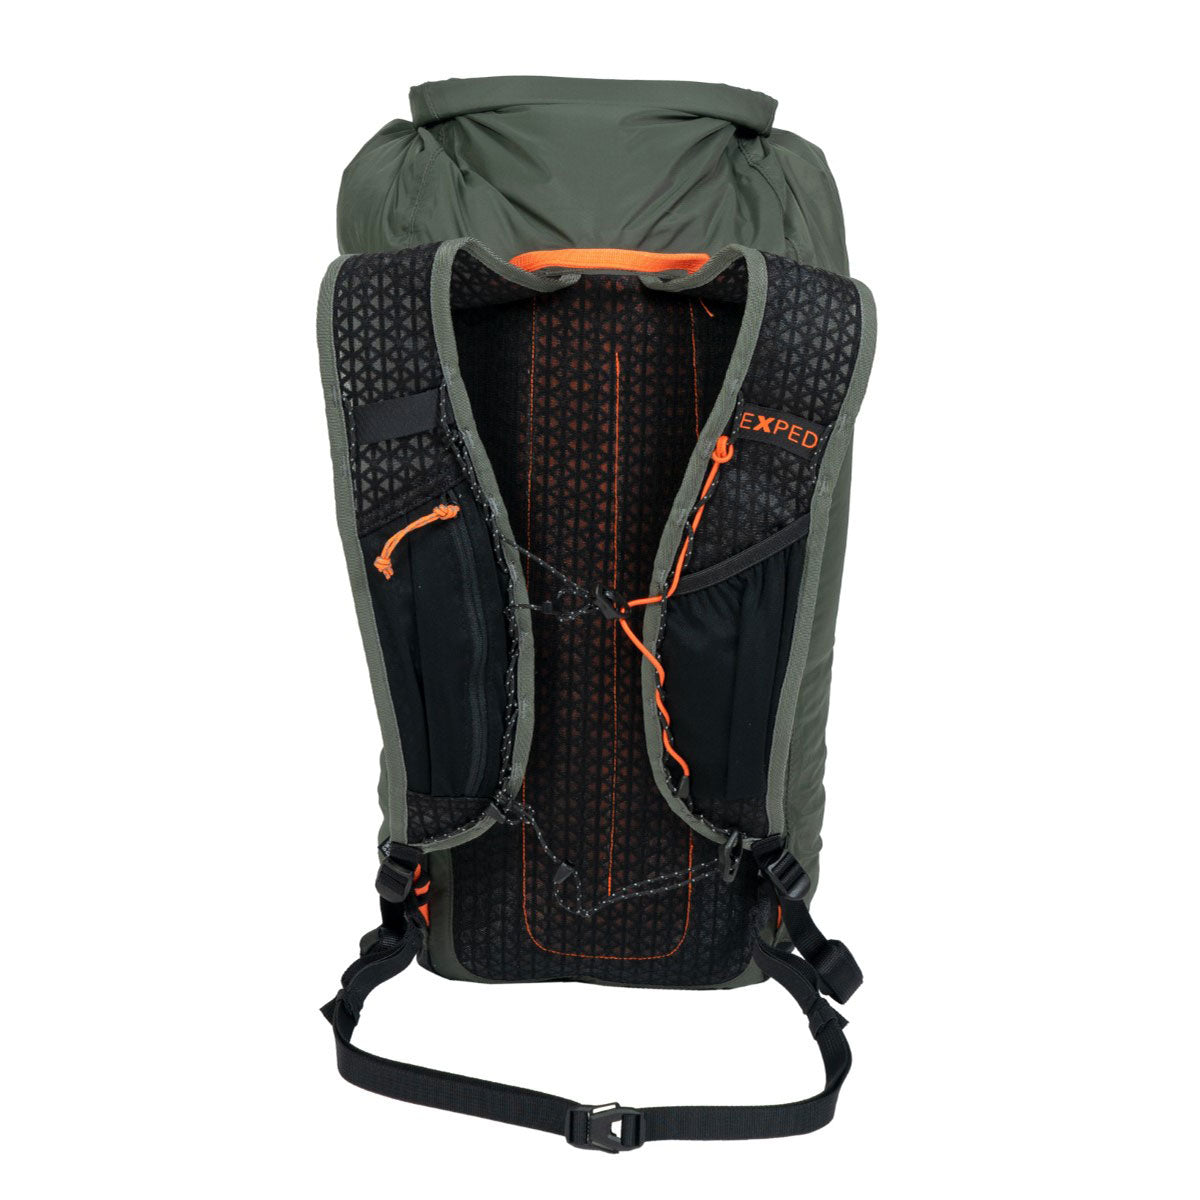 EXPED Storm Runner grey rear